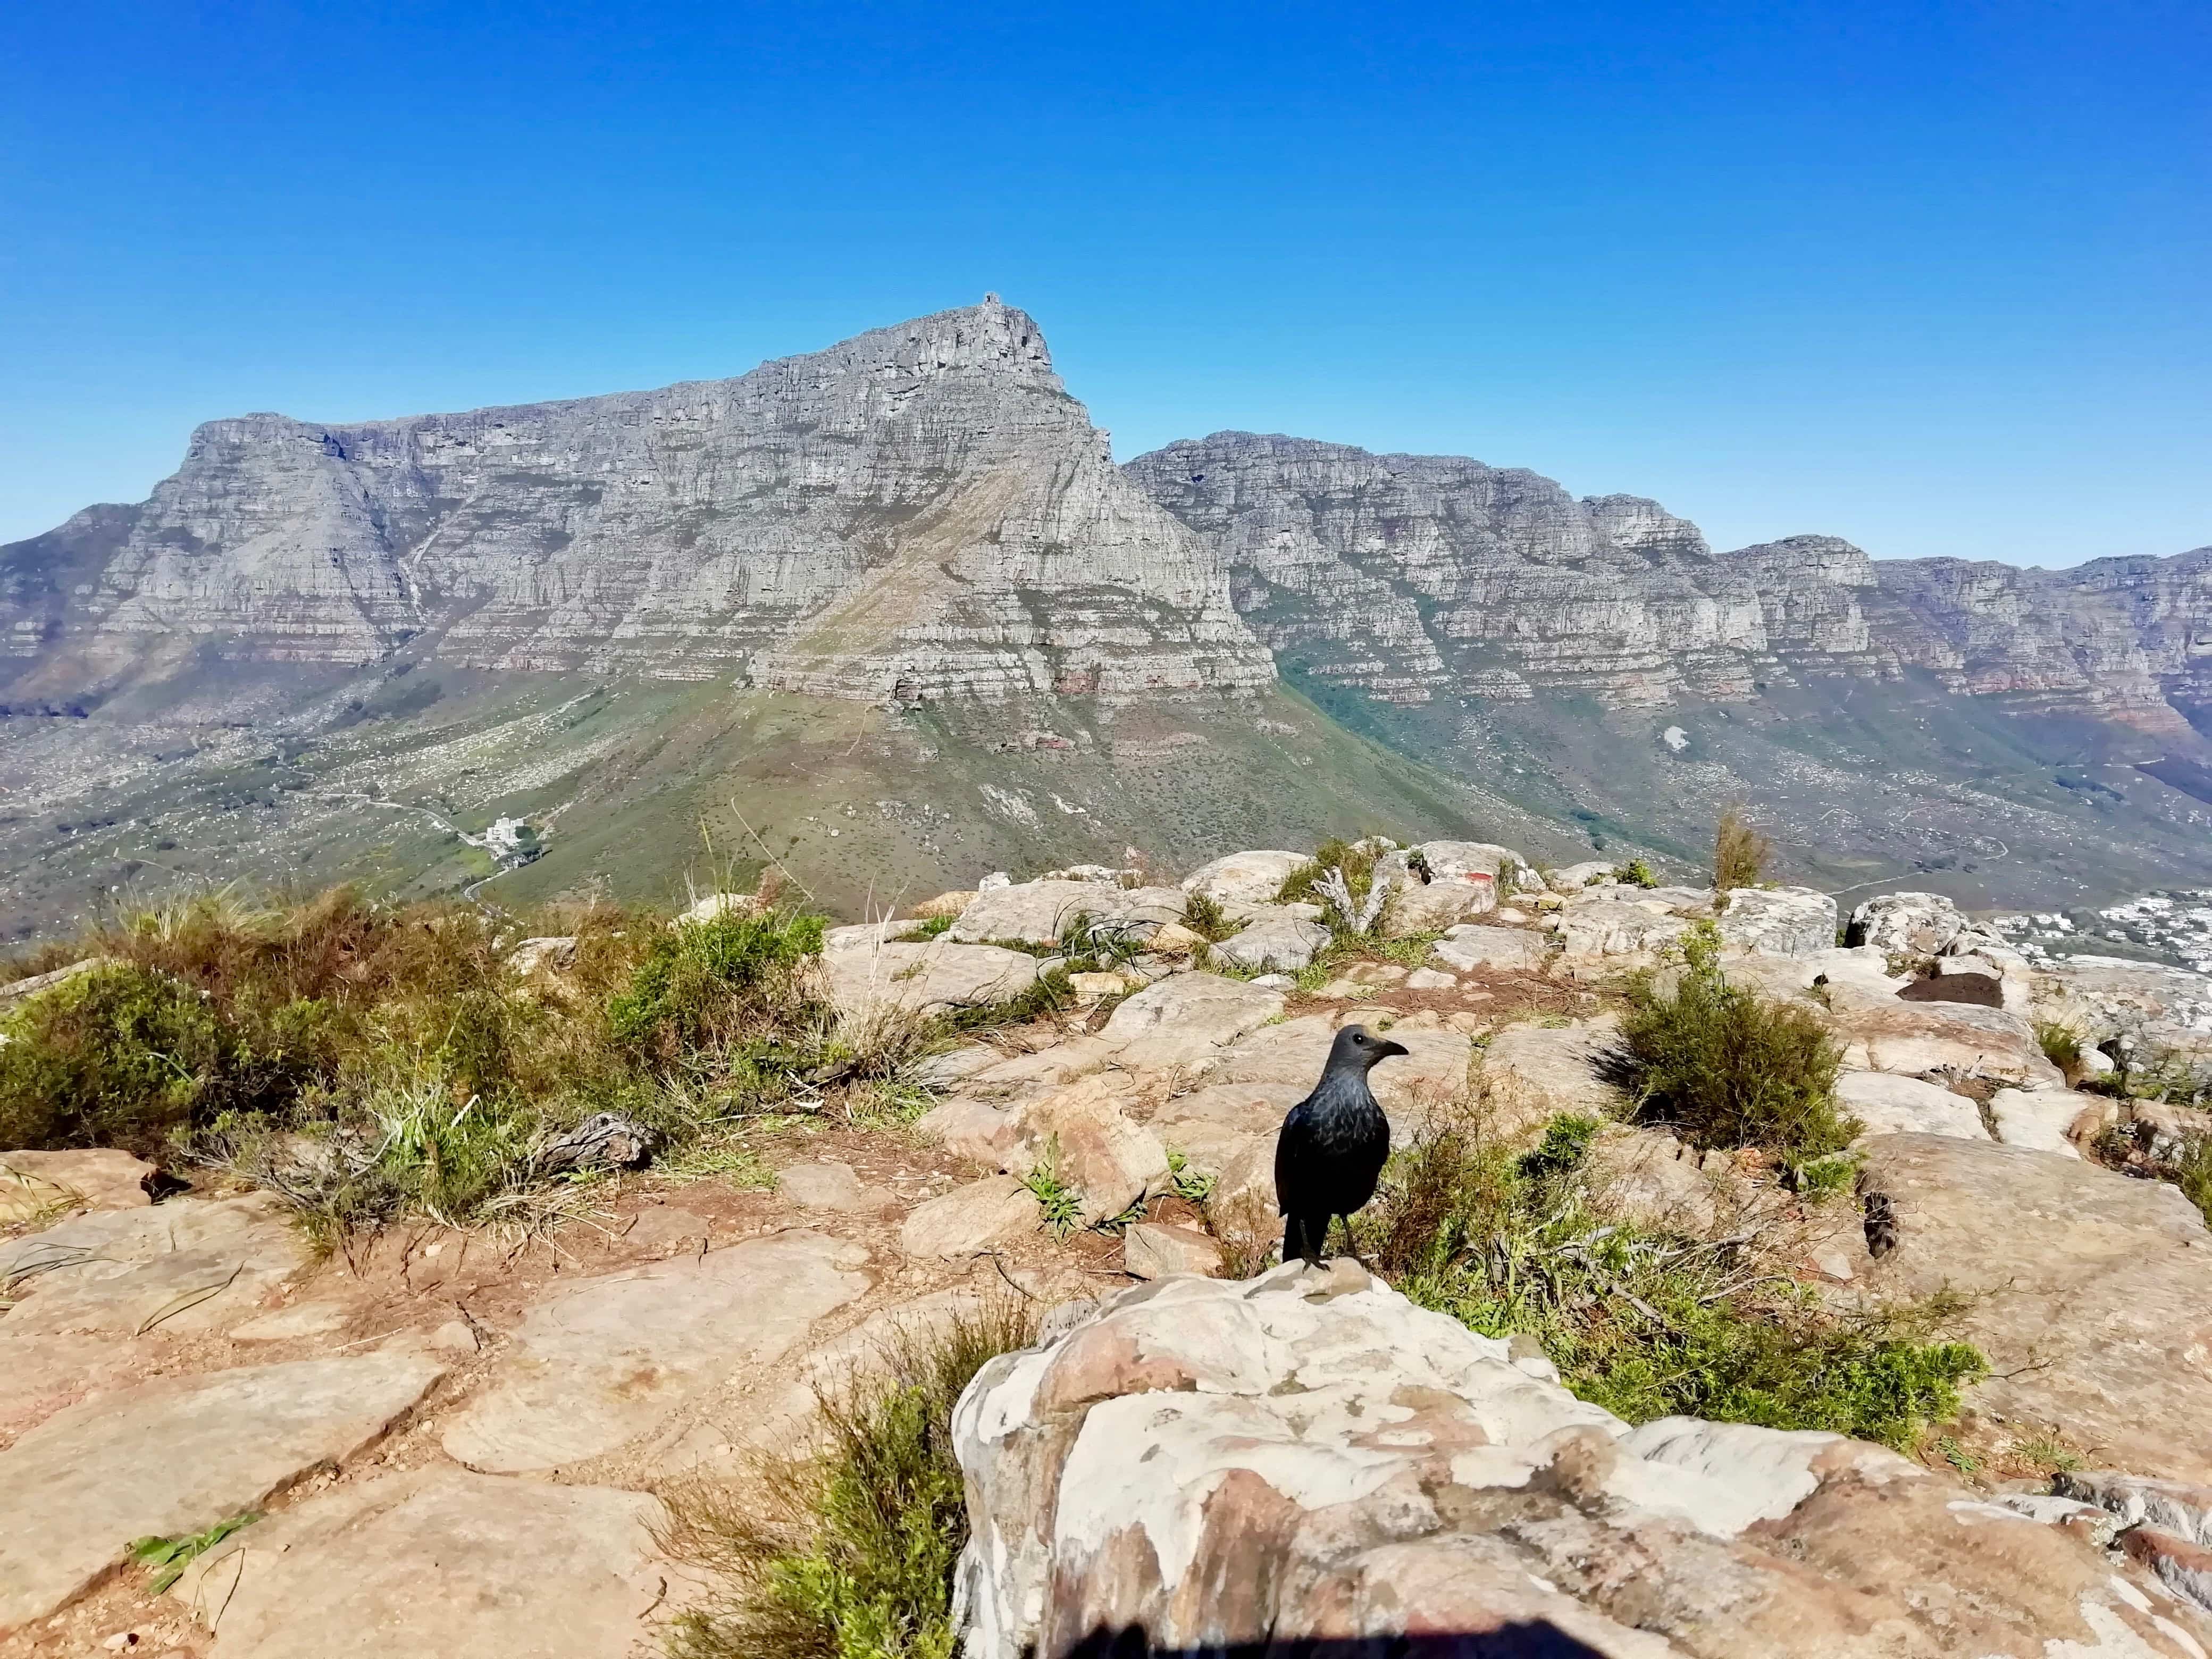 A bird and view of Table Mountain from the top of Lion's Head